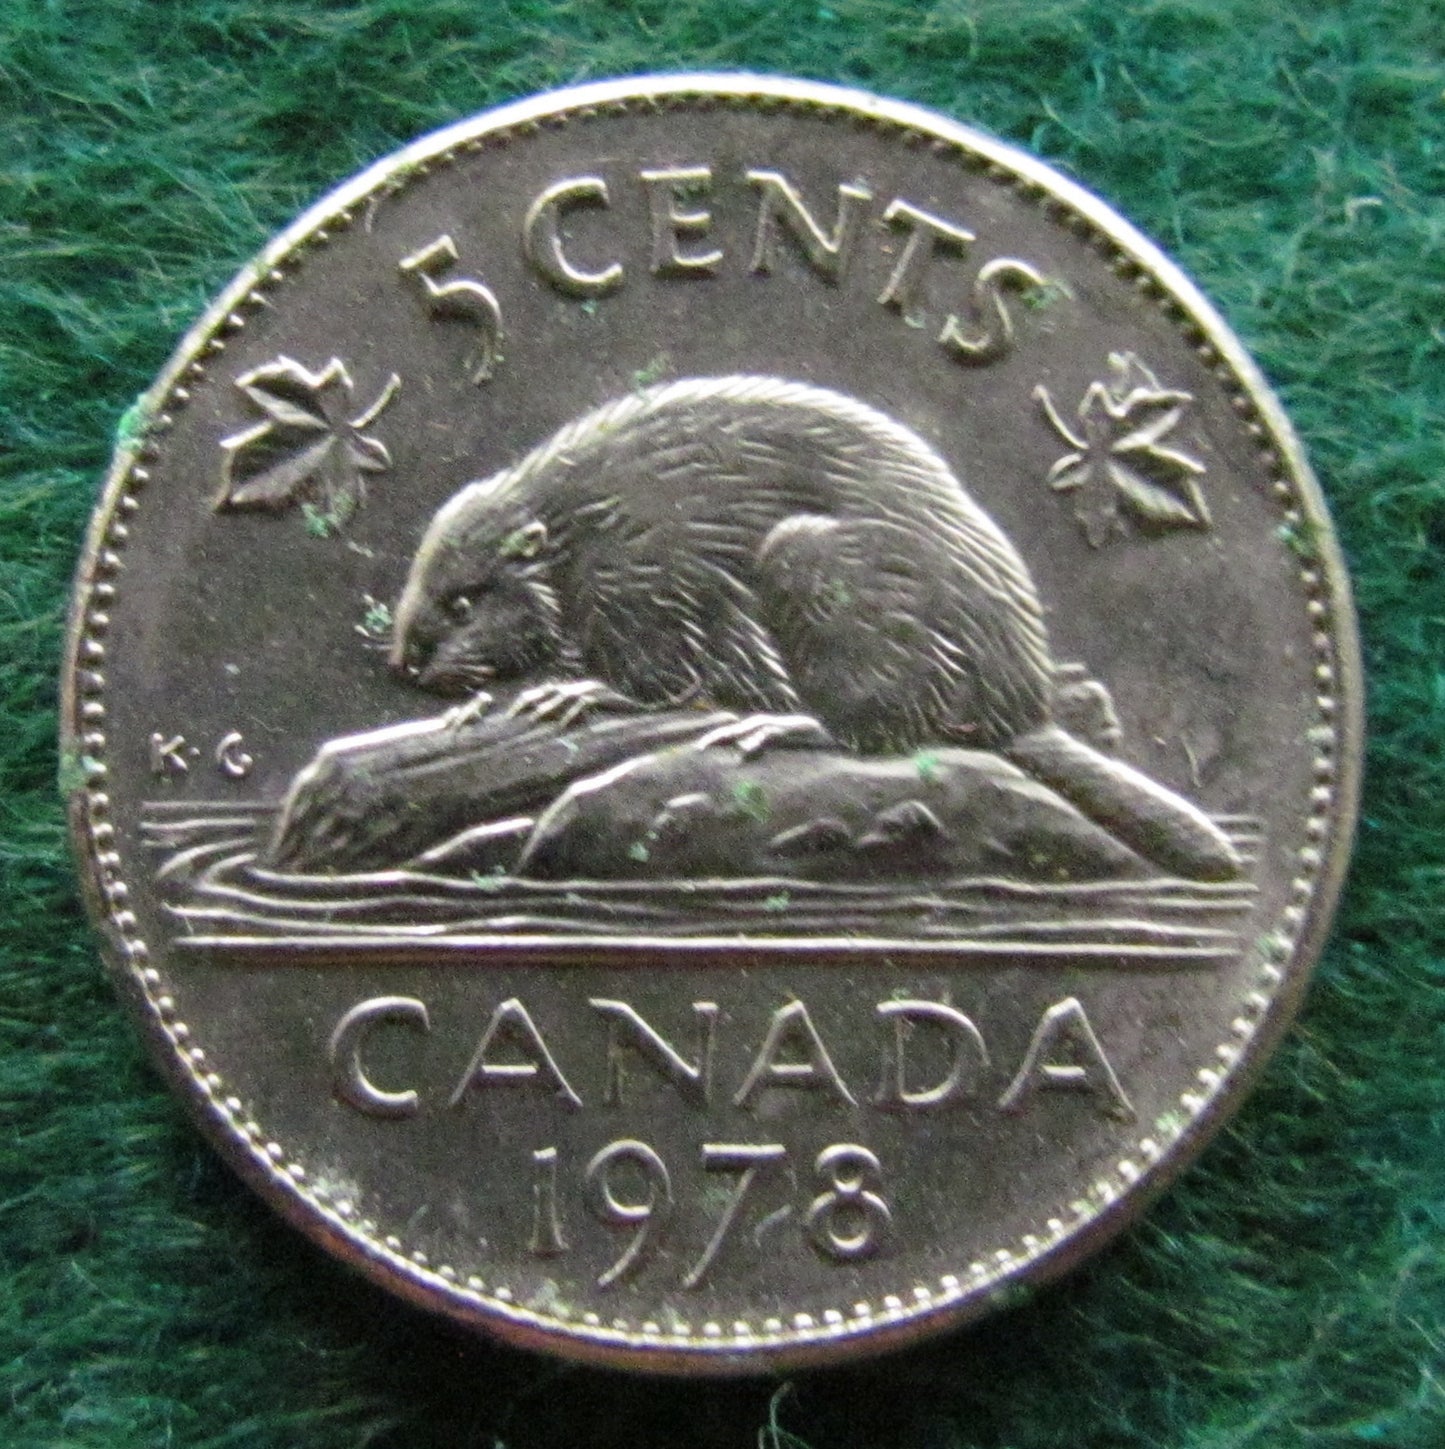 Canada 1978 5 Cent King George V Coin